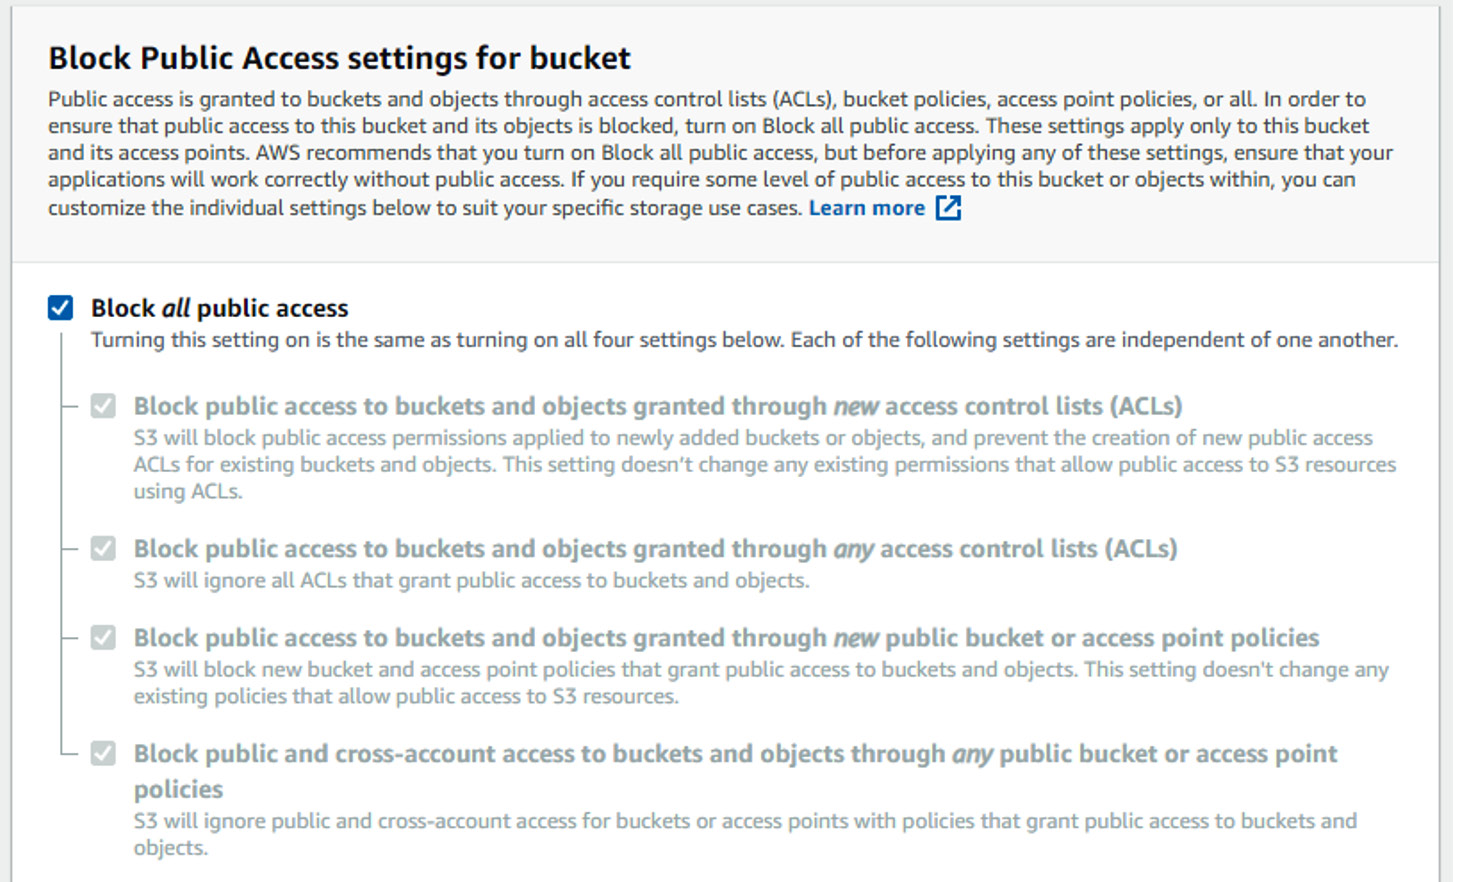 Figure 5.1 – Block Public Access settings for bucket page
